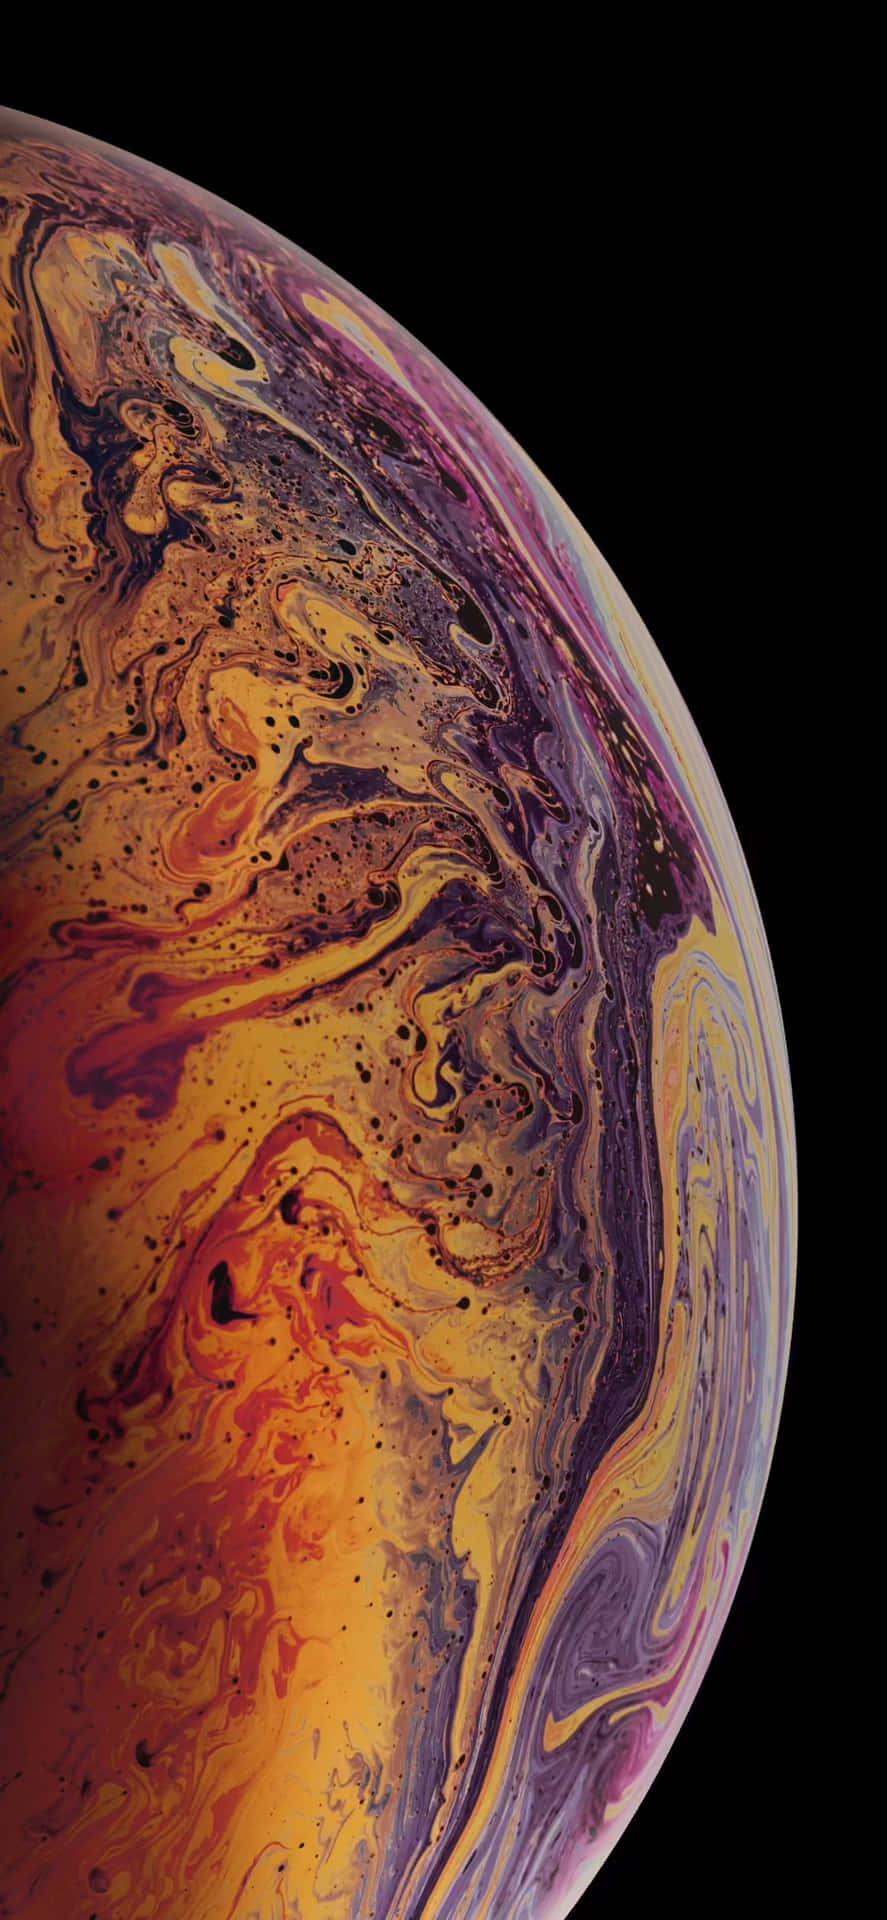 Enjoy a spectacular view of the Earth from your iPhone. Wallpaper